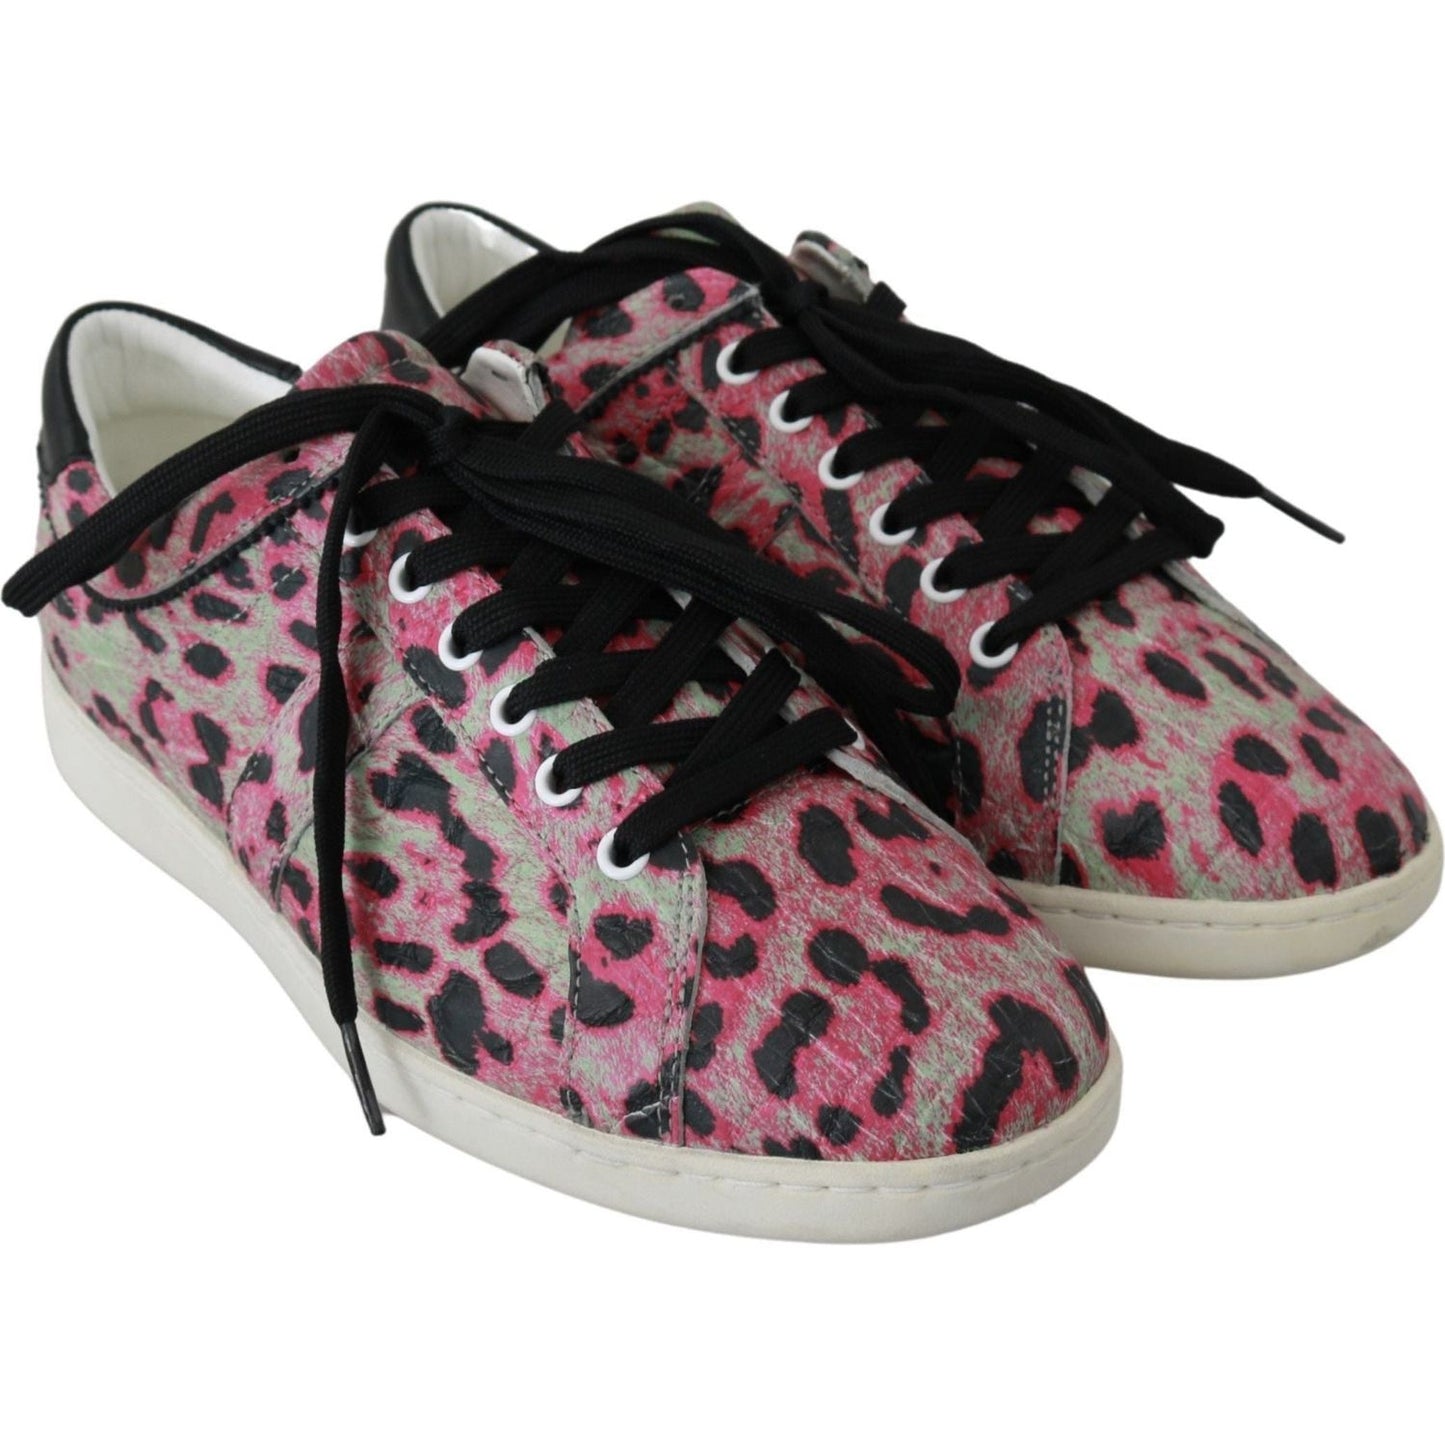 Dolce & Gabbana Multicolor Crocodile Leather Sneakers pink-leopard-print-training-leather-flat-sneakers IMG_9746-b8a2ee35-927.jpg